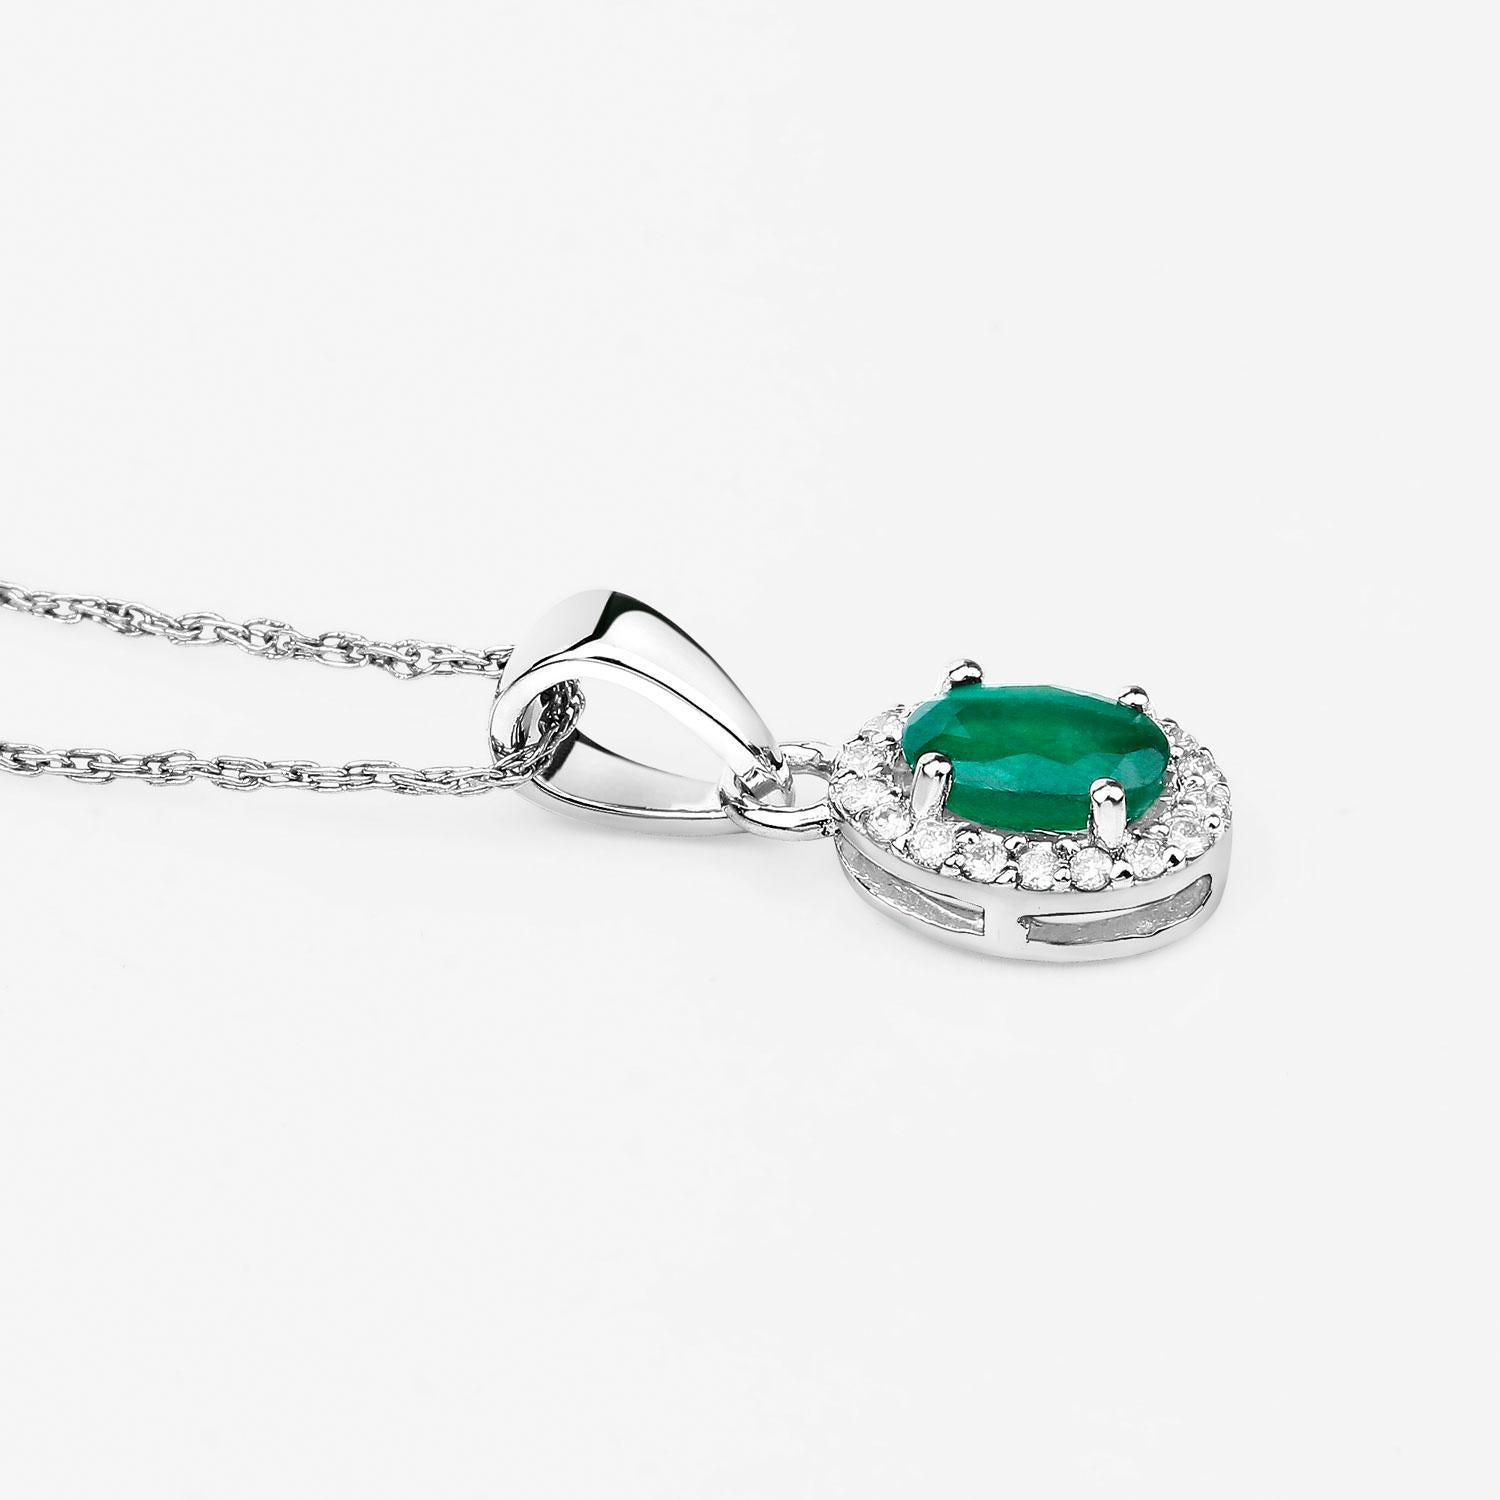 Zambian Emerald Pendant Necklace With Diamonds 0.81 Carats 14K White Gold In Excellent Condition For Sale In Laguna Niguel, CA